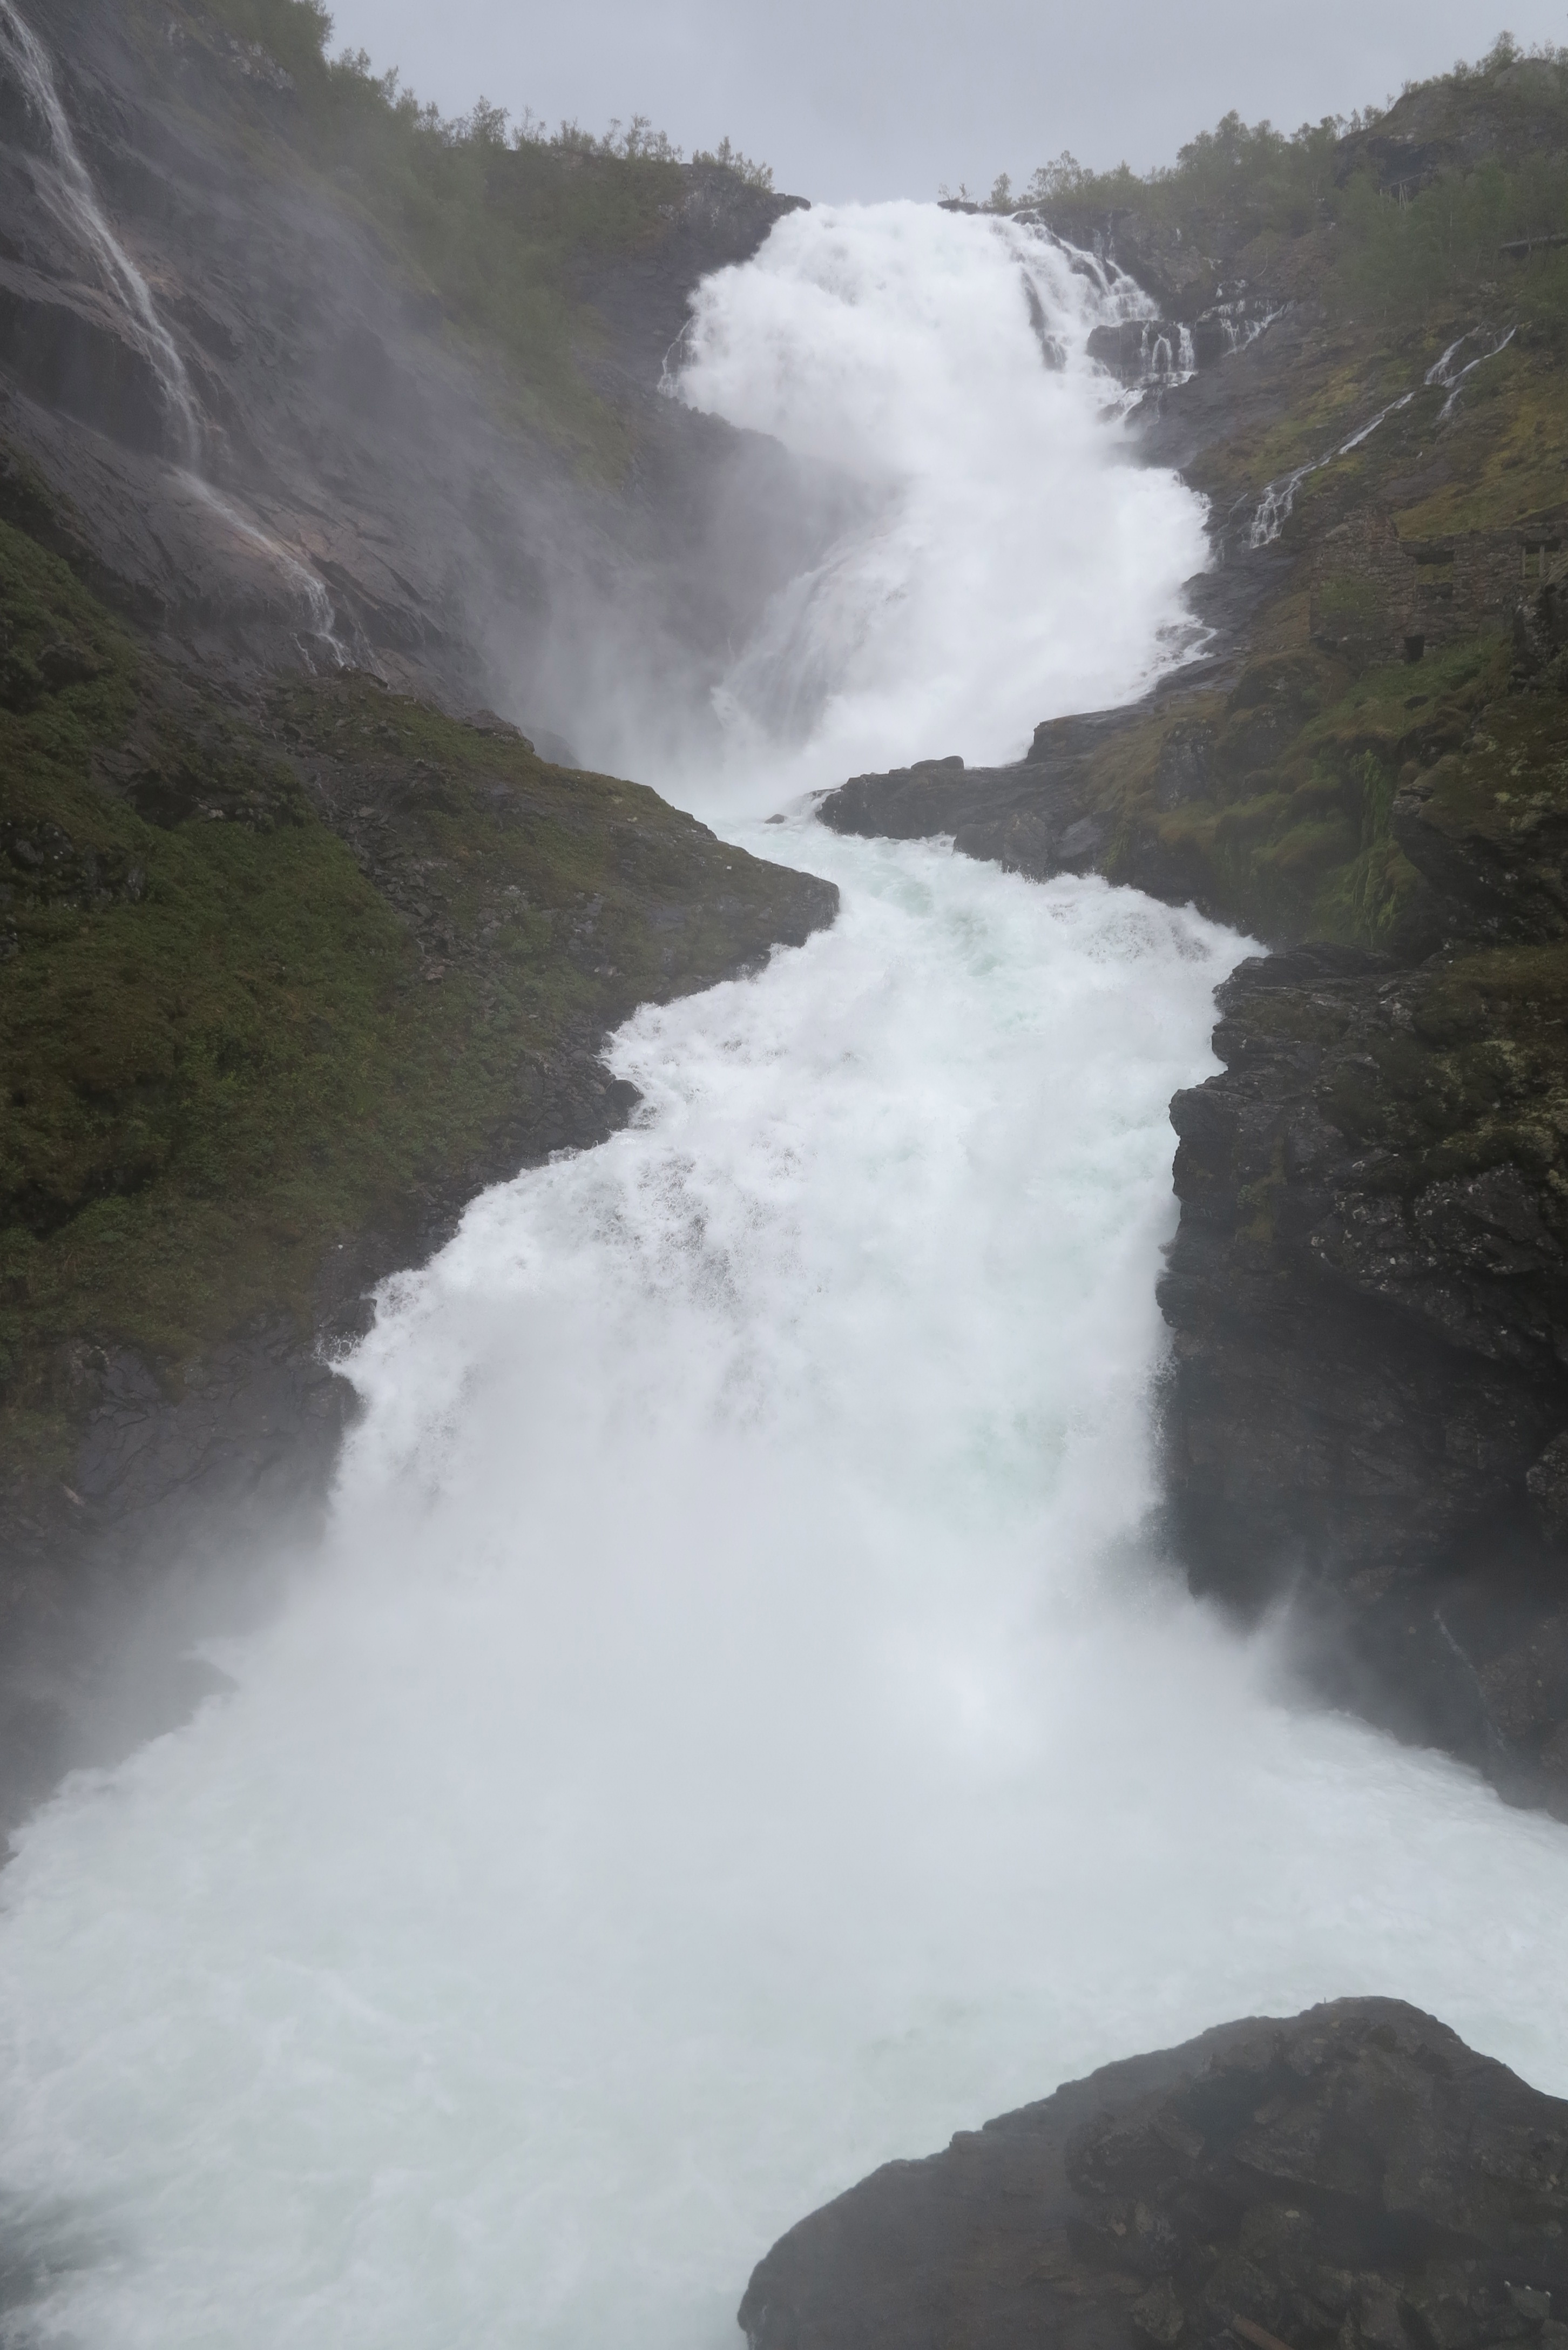 Station blaster: The waterfall at on the Flåm line